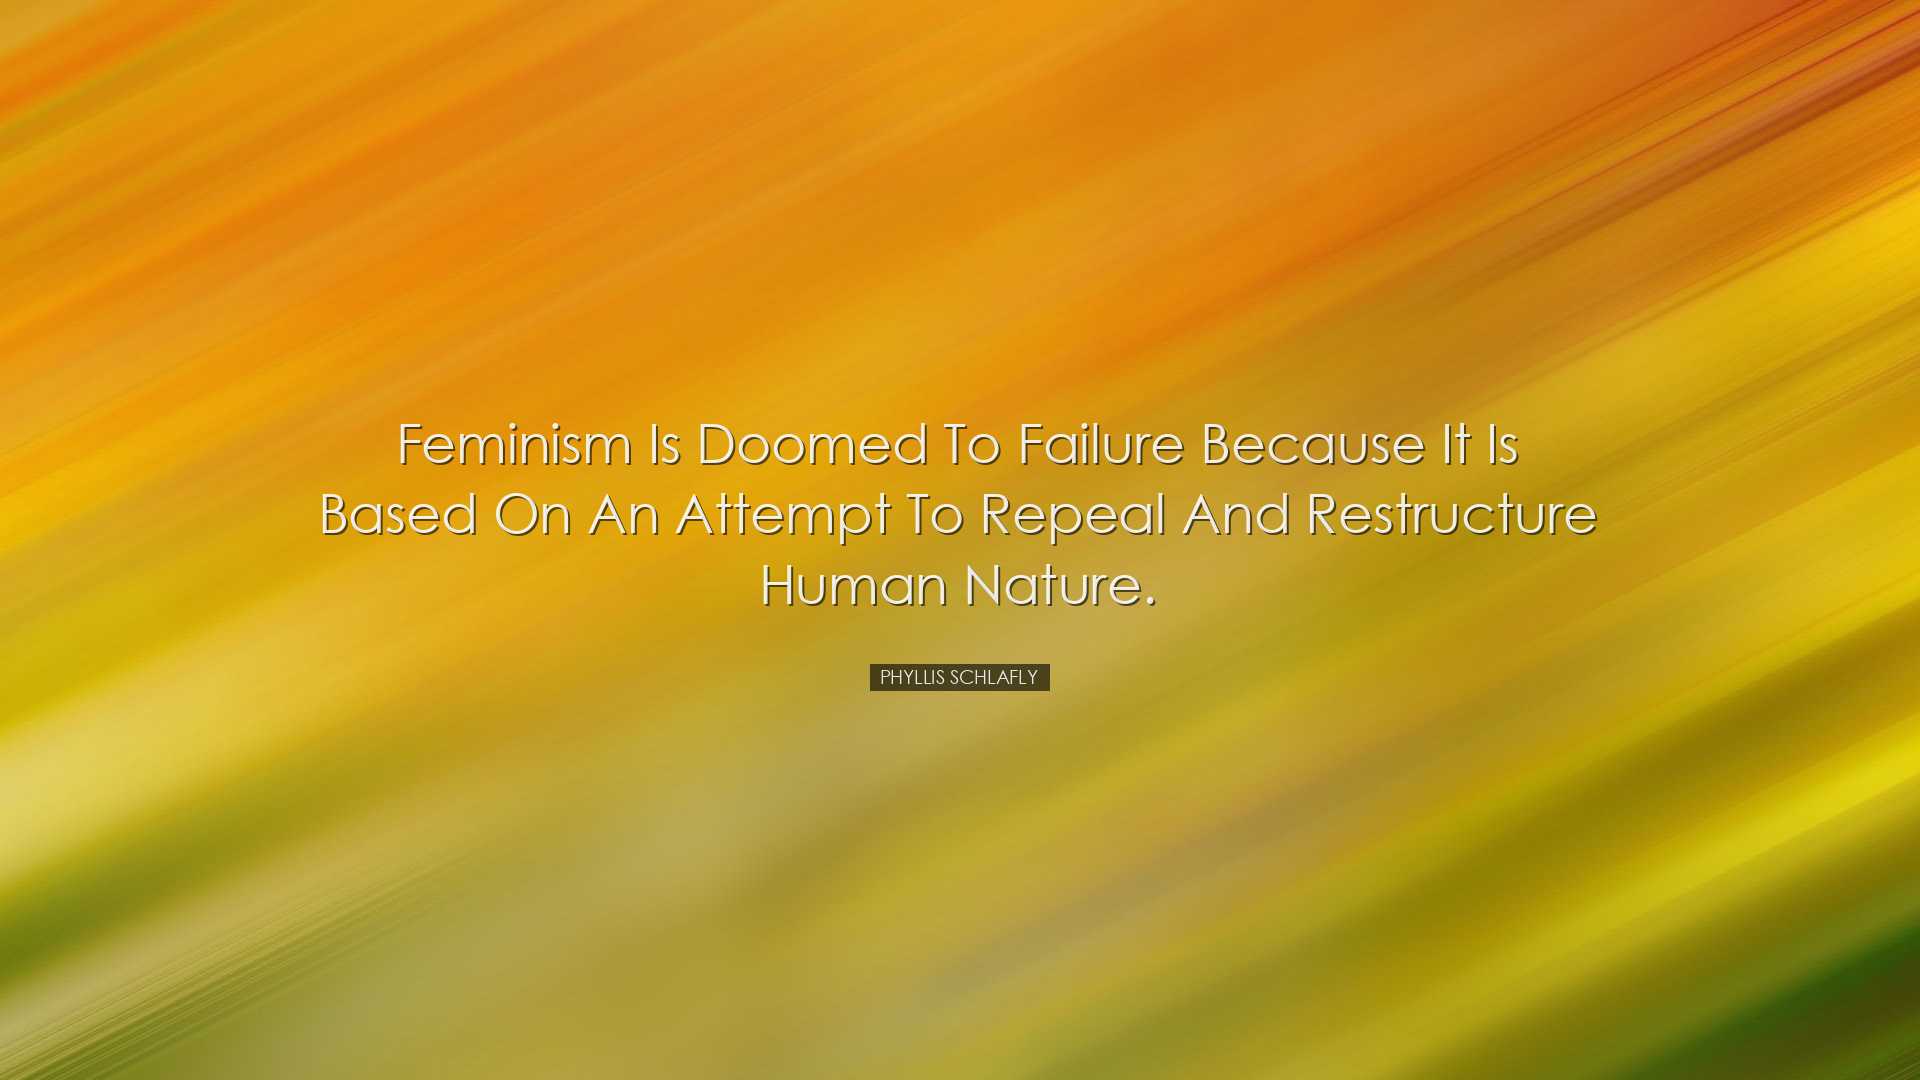 Feminism is doomed to failure because it is based on an attempt to